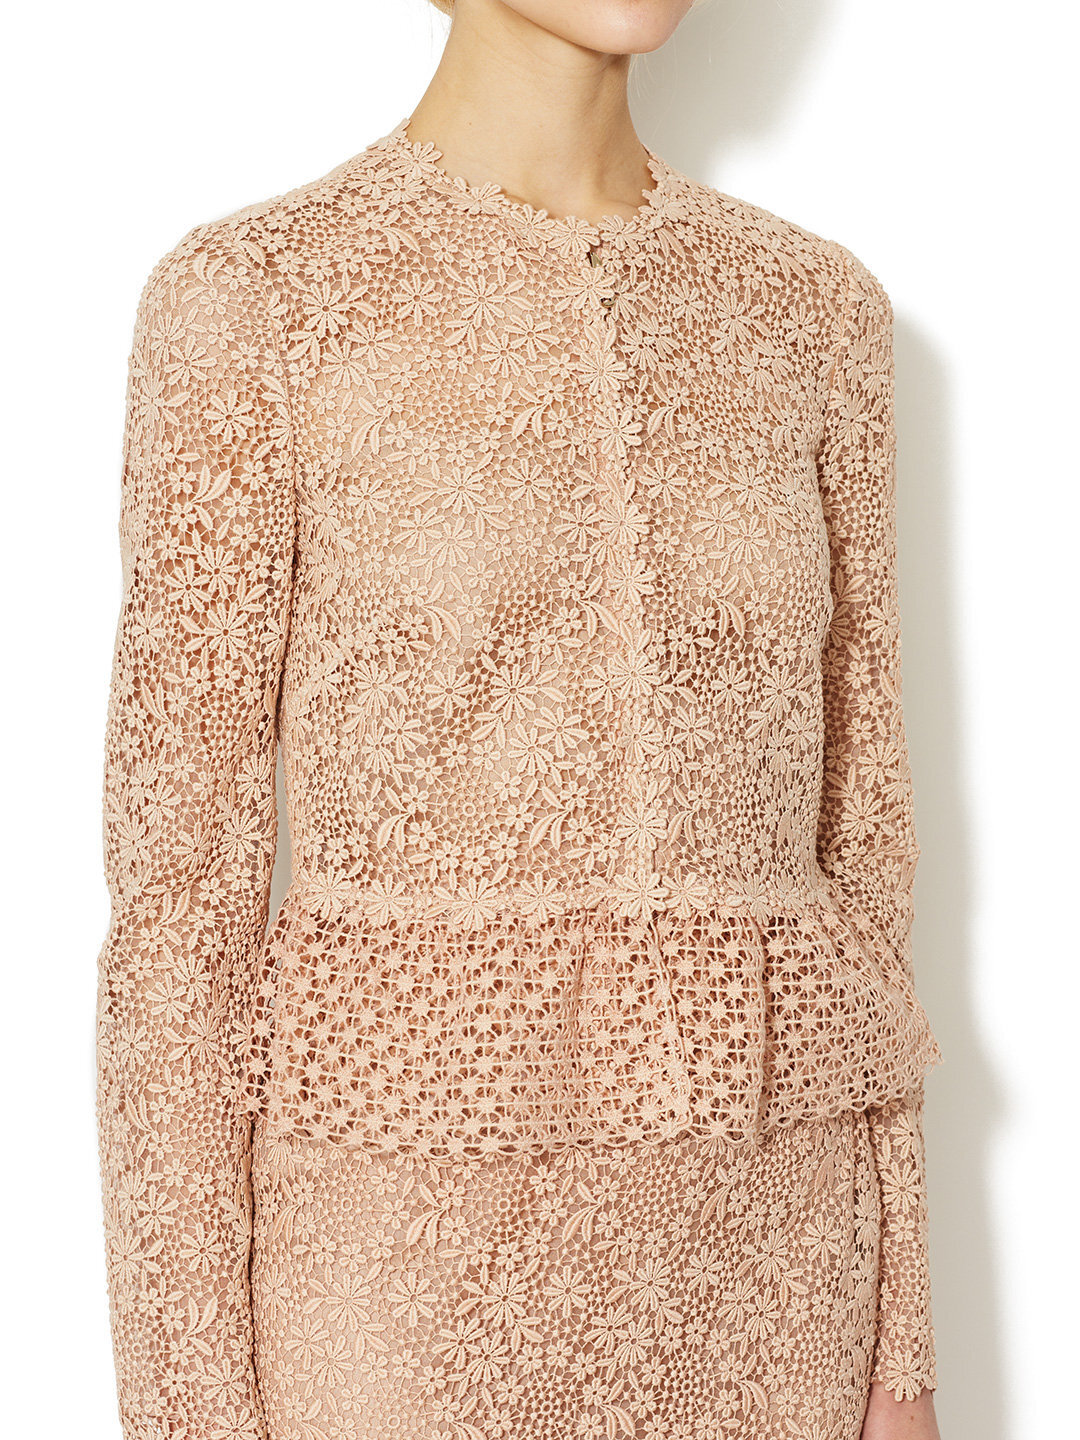 Valentino Embroidered Lace Jacket.jpg